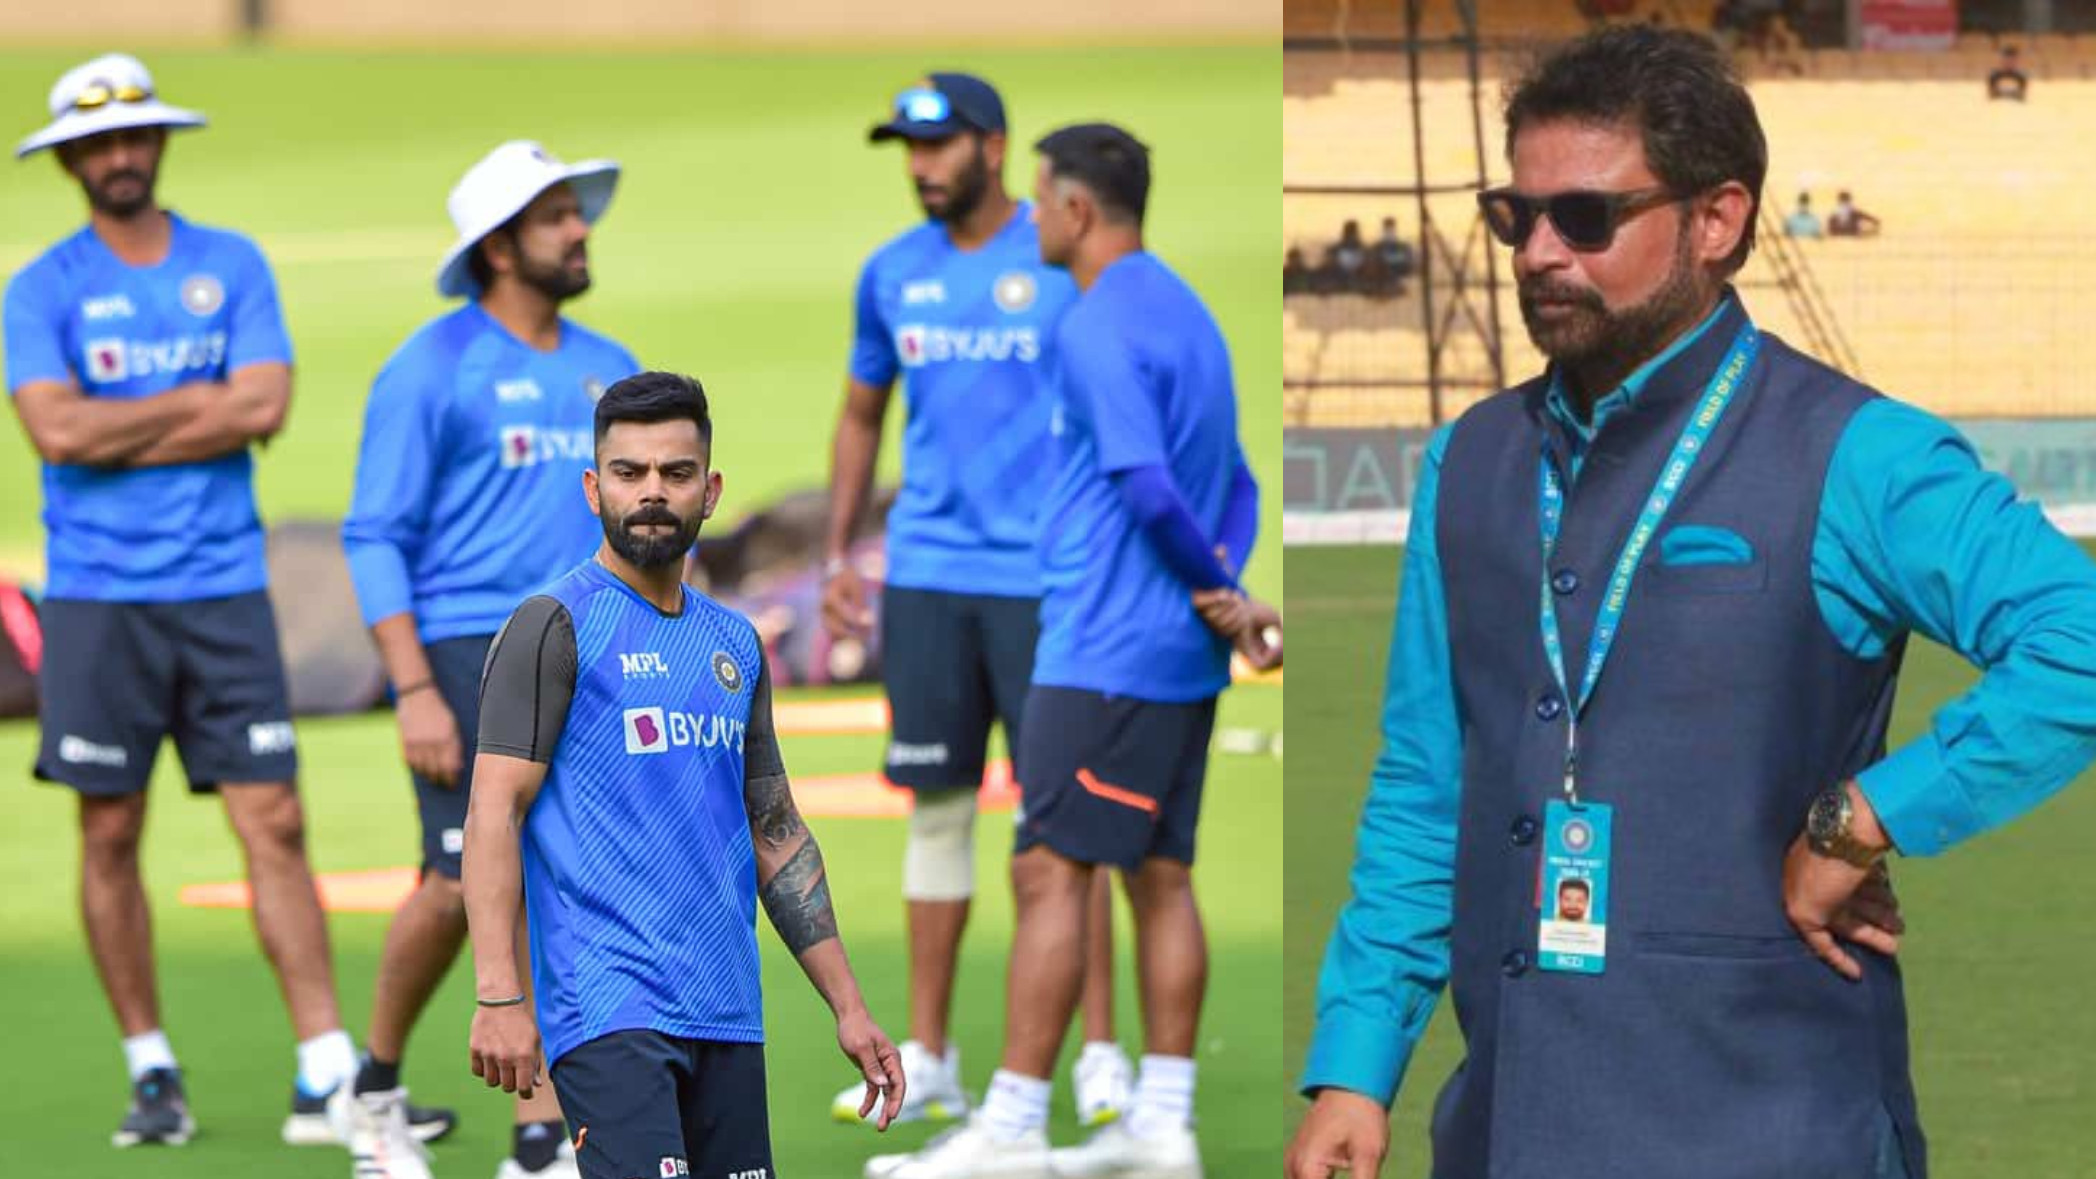 Indian players told BCCI they lost trust in Chetan Sharma after his ‘injection’ revelation in sting operation- Report